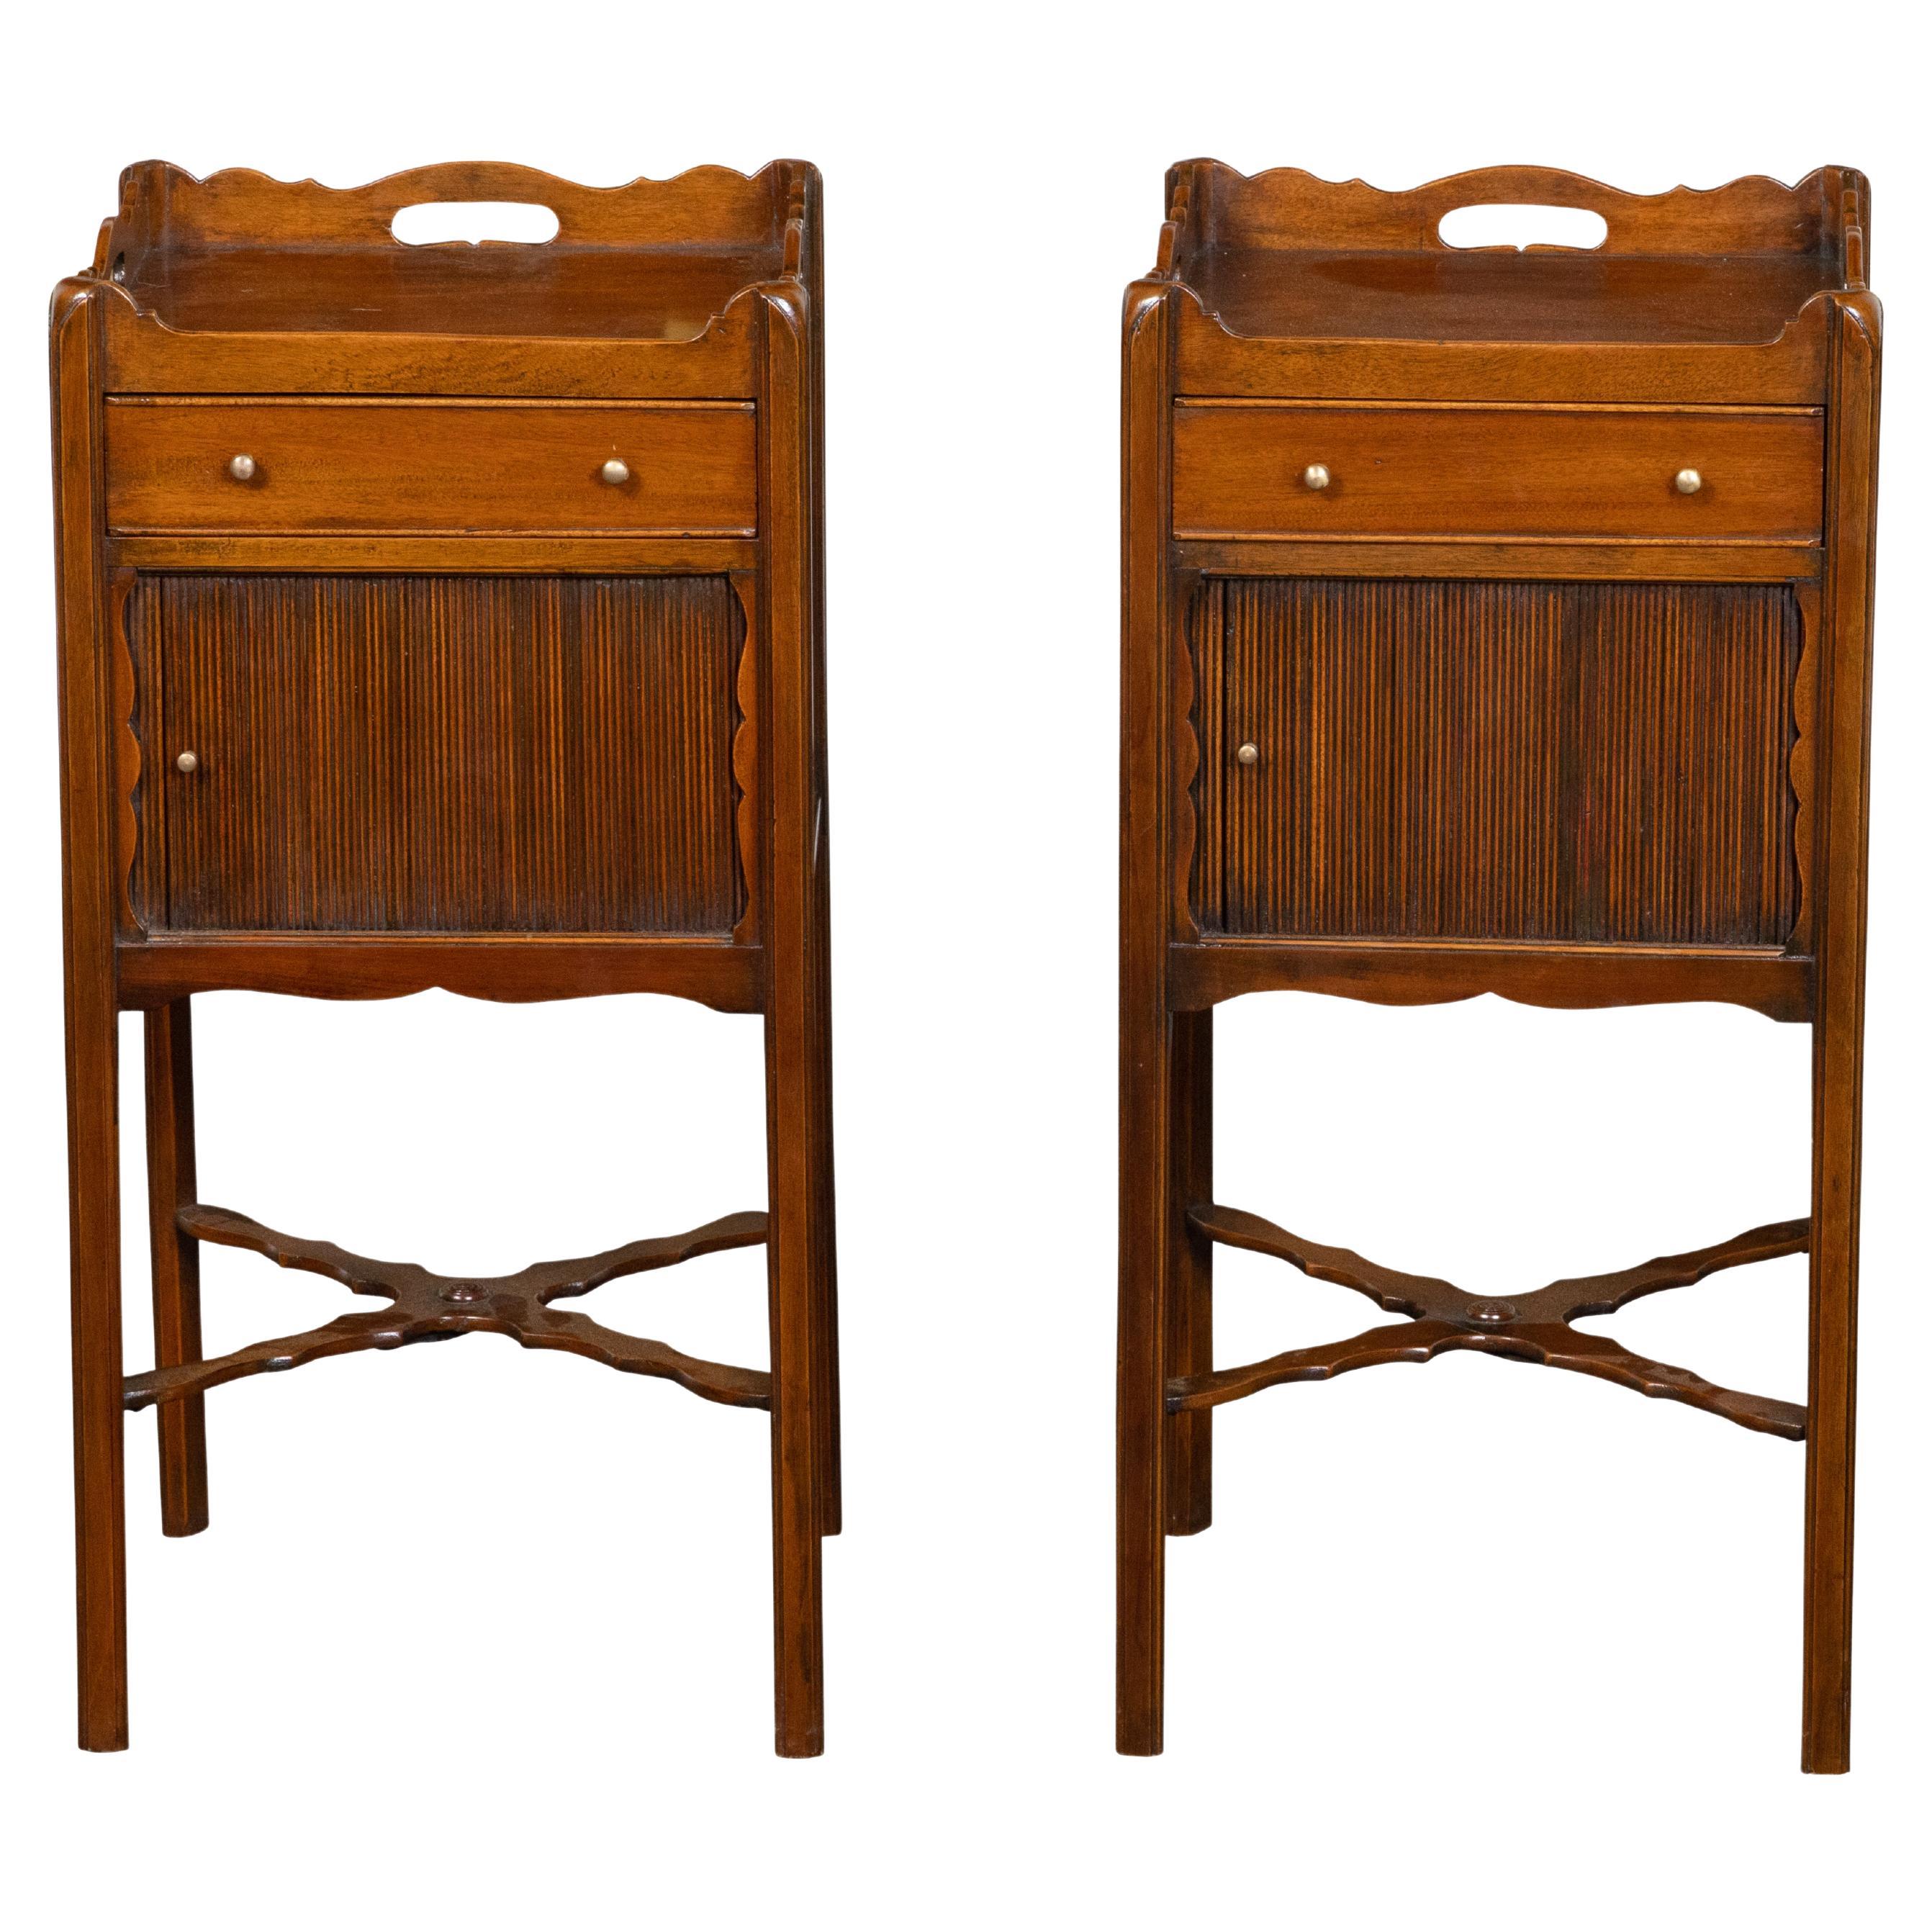 Pair of English 1900s Mahogany Bedside Tables with Drawer and Tambour Door